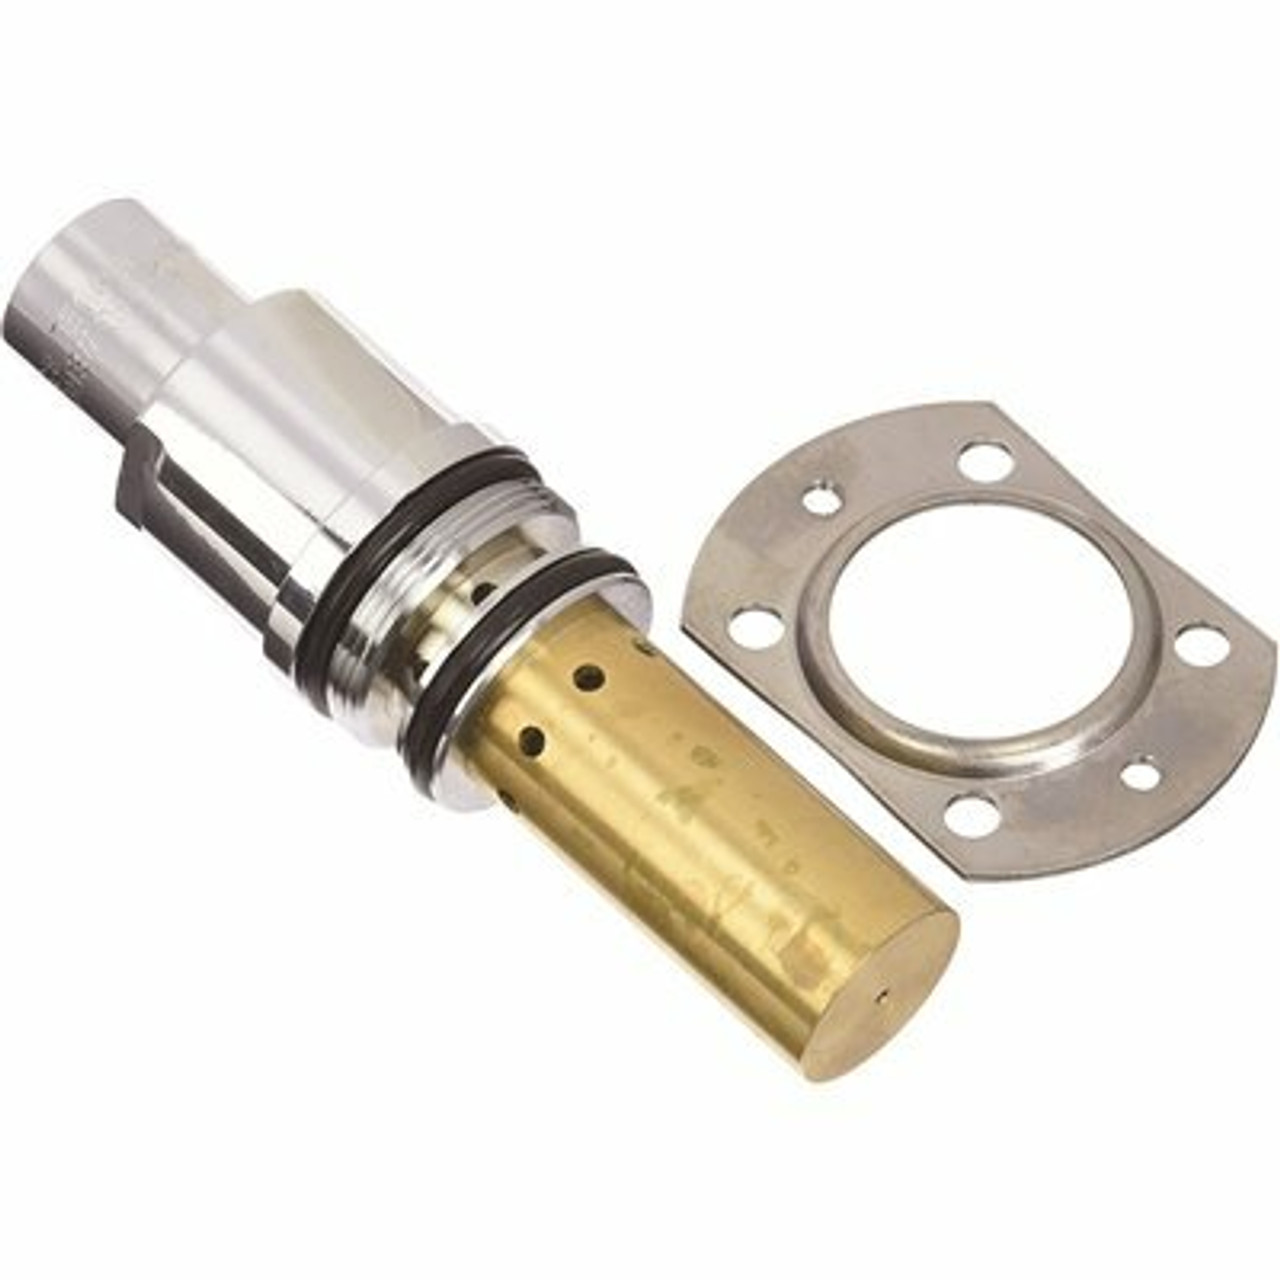 Symmons Shower-Off Metering Cartridge Replacement